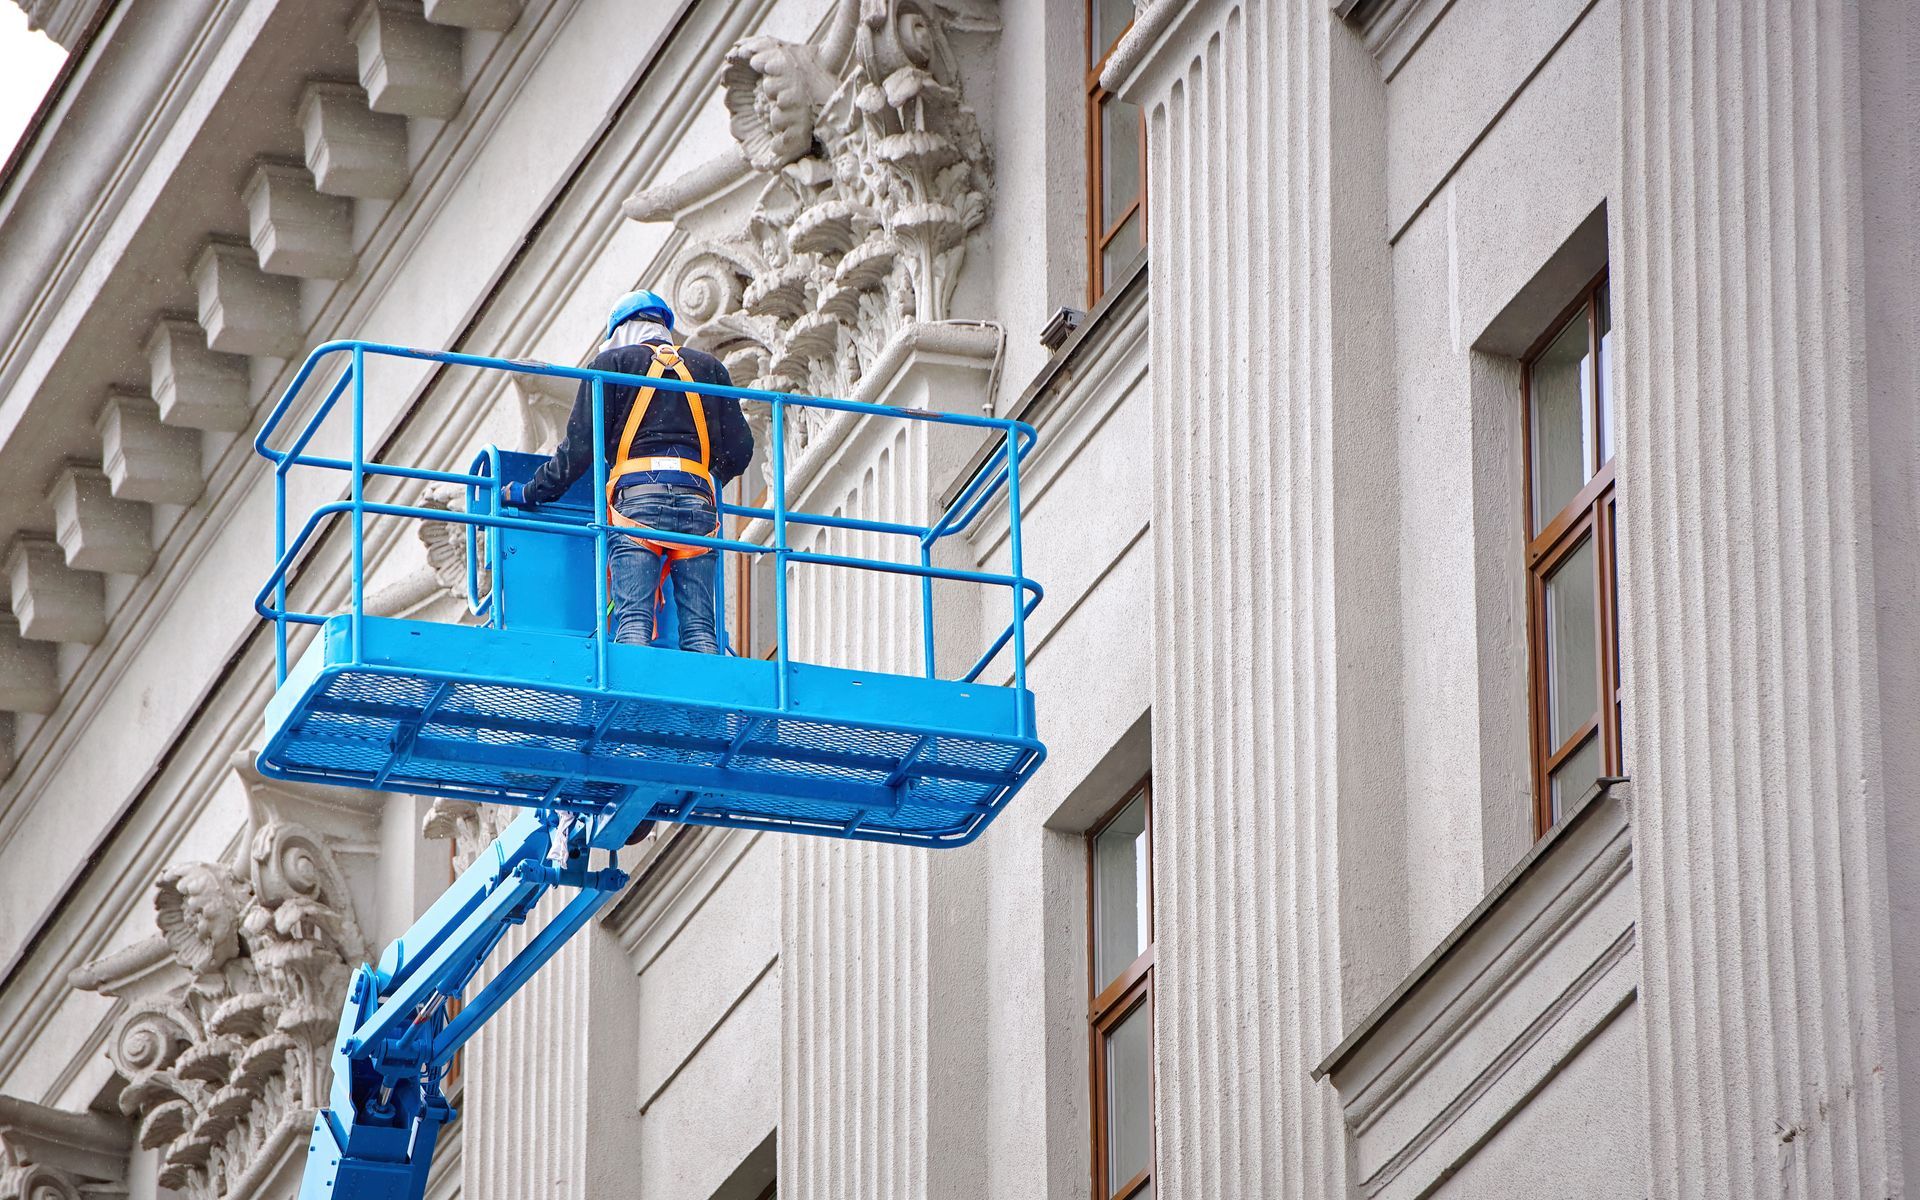 A man is working on the side of a building on a lift.